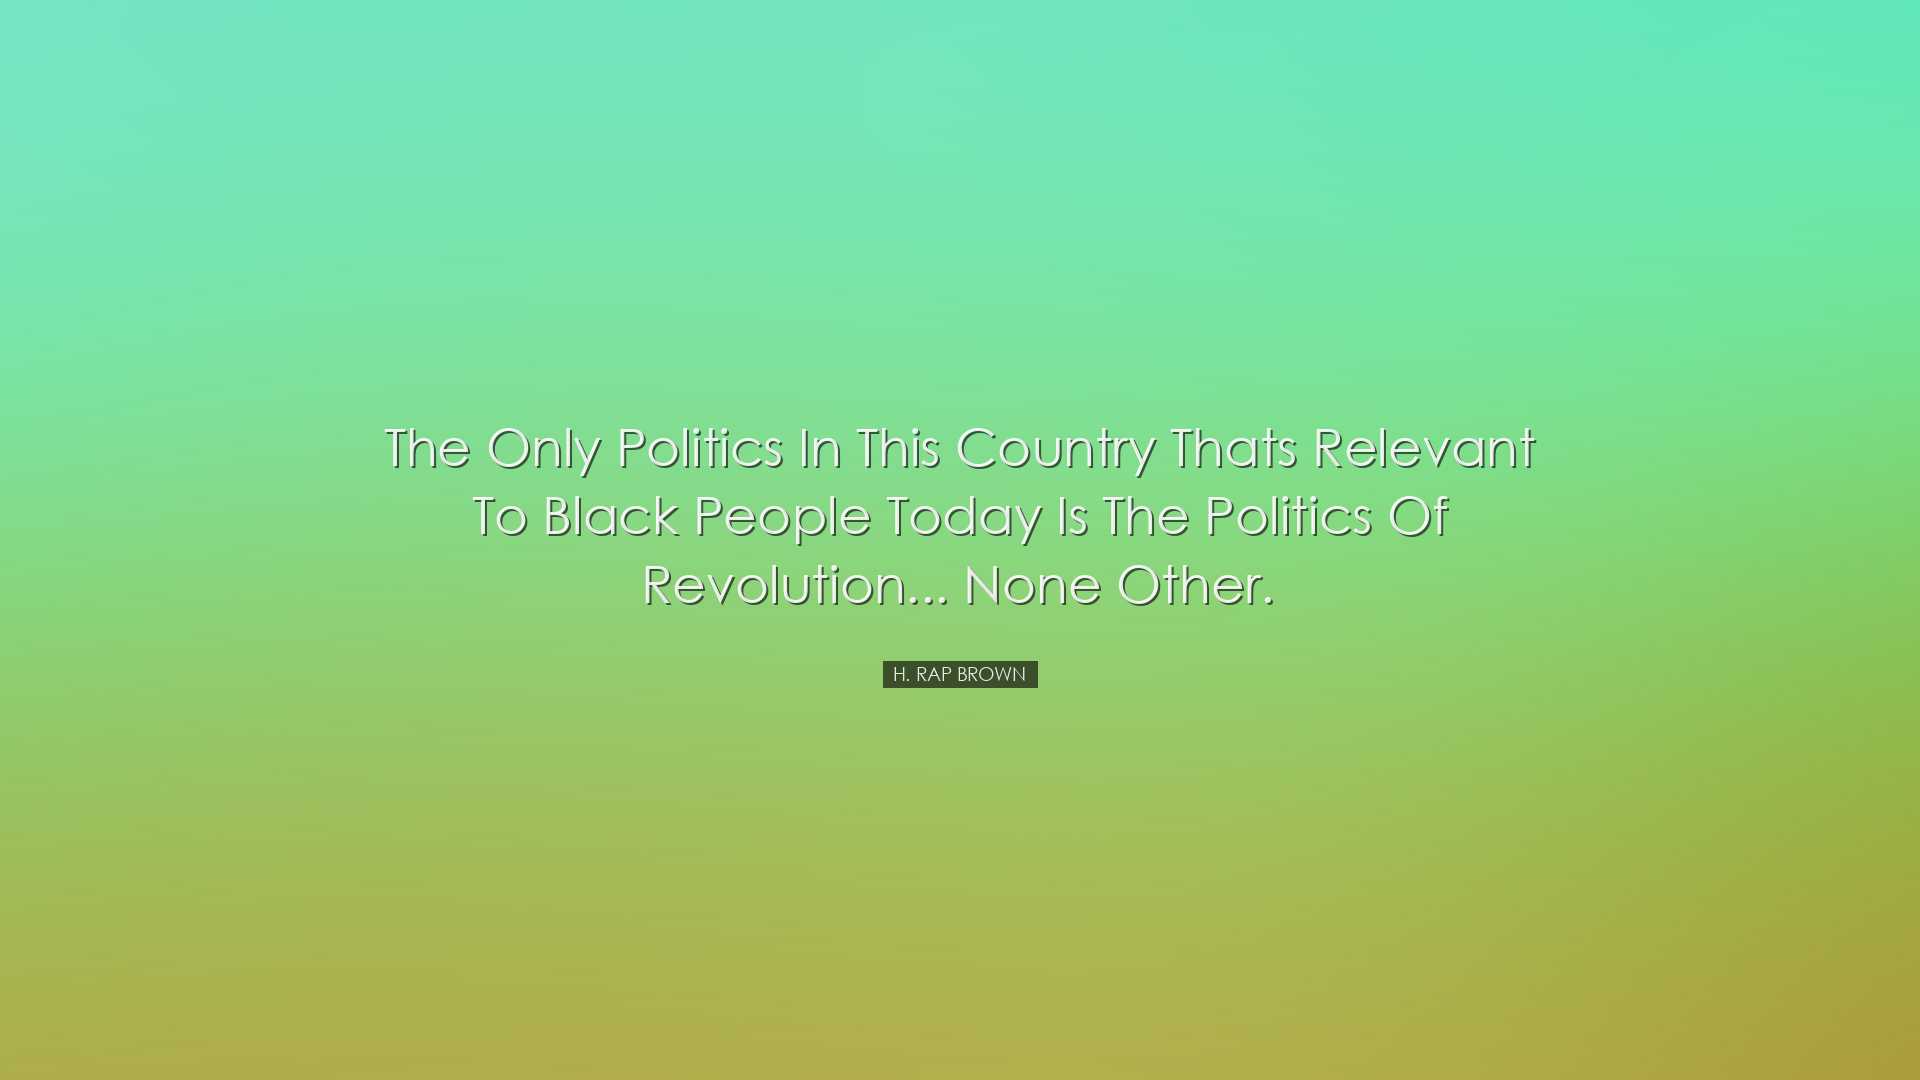 The only politics in this country thats relevant to black people t